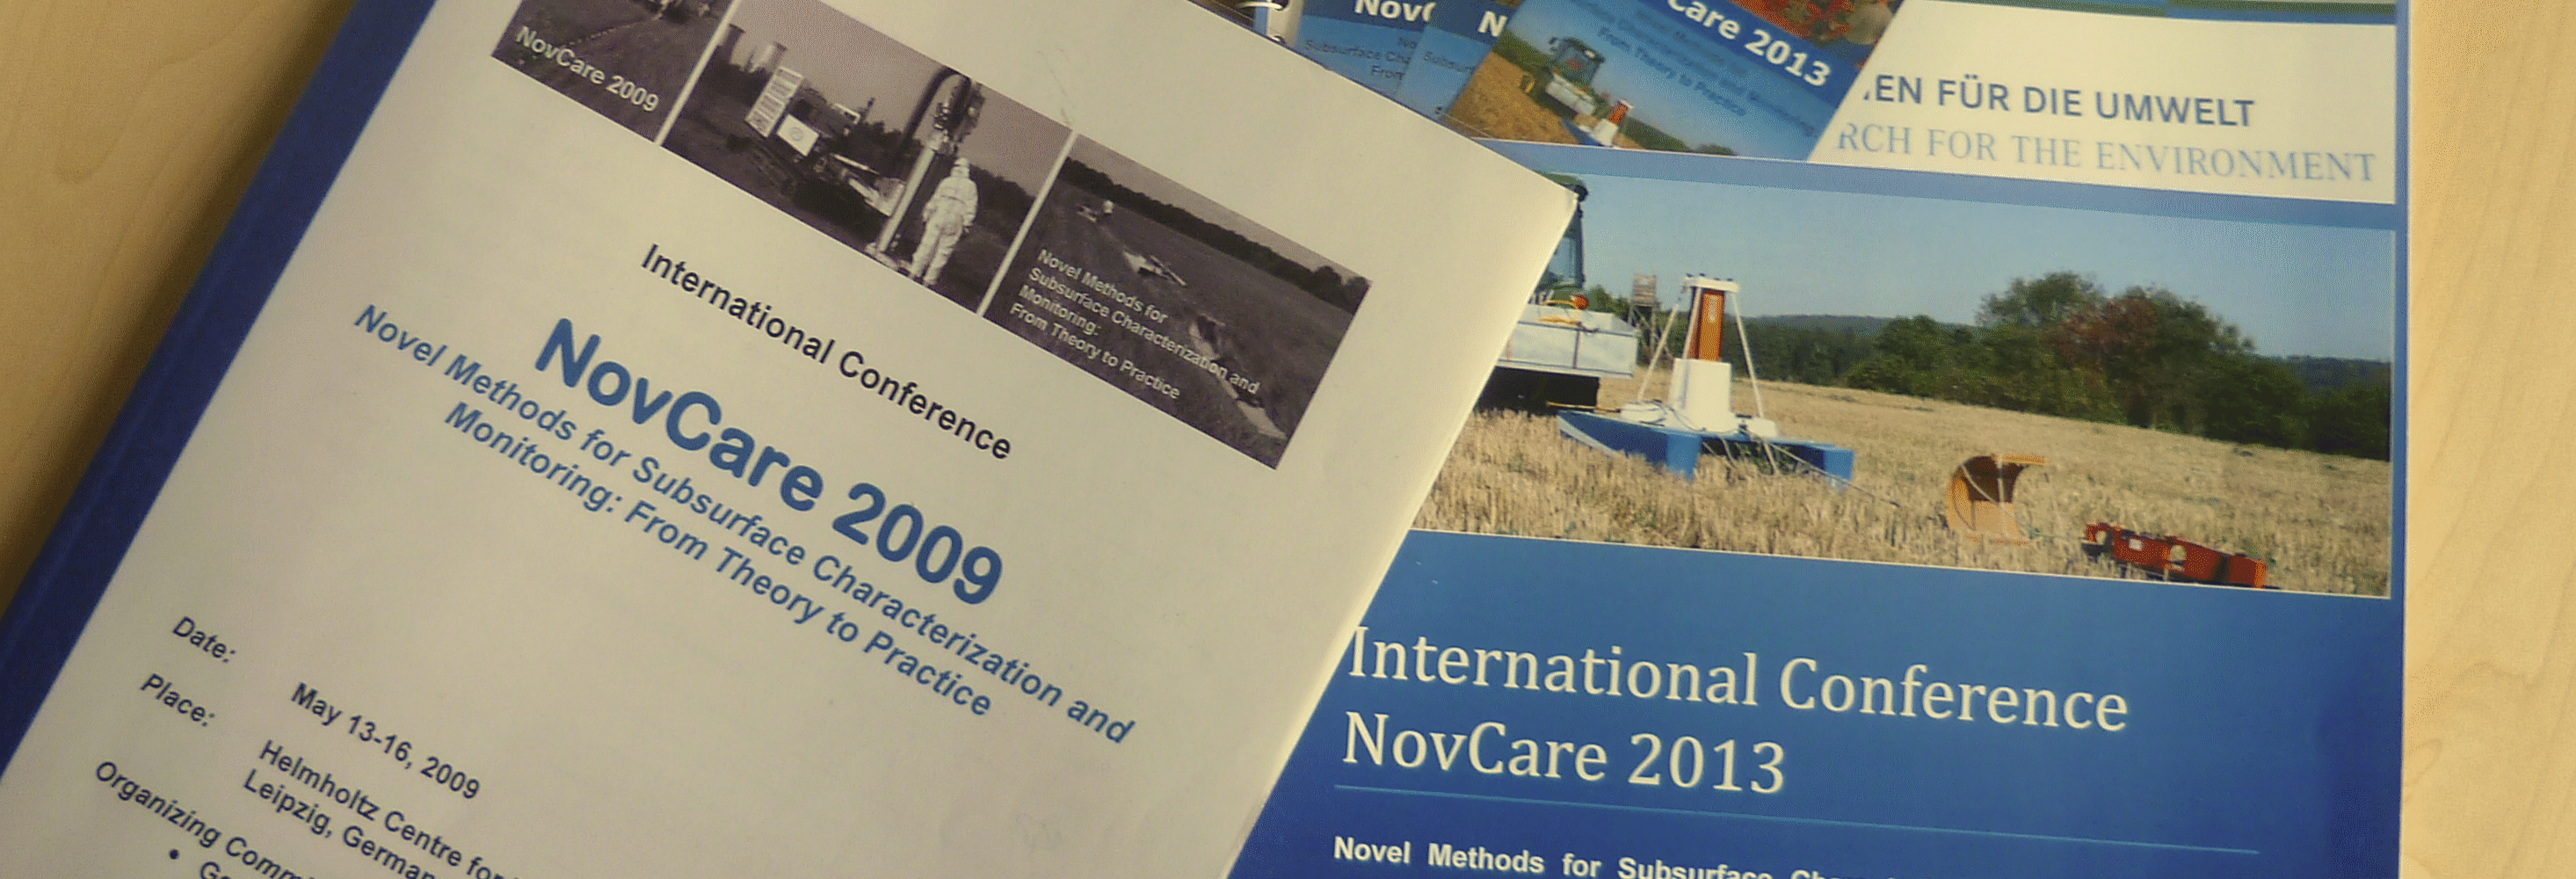 Conference Proceedings 2009 and 2013